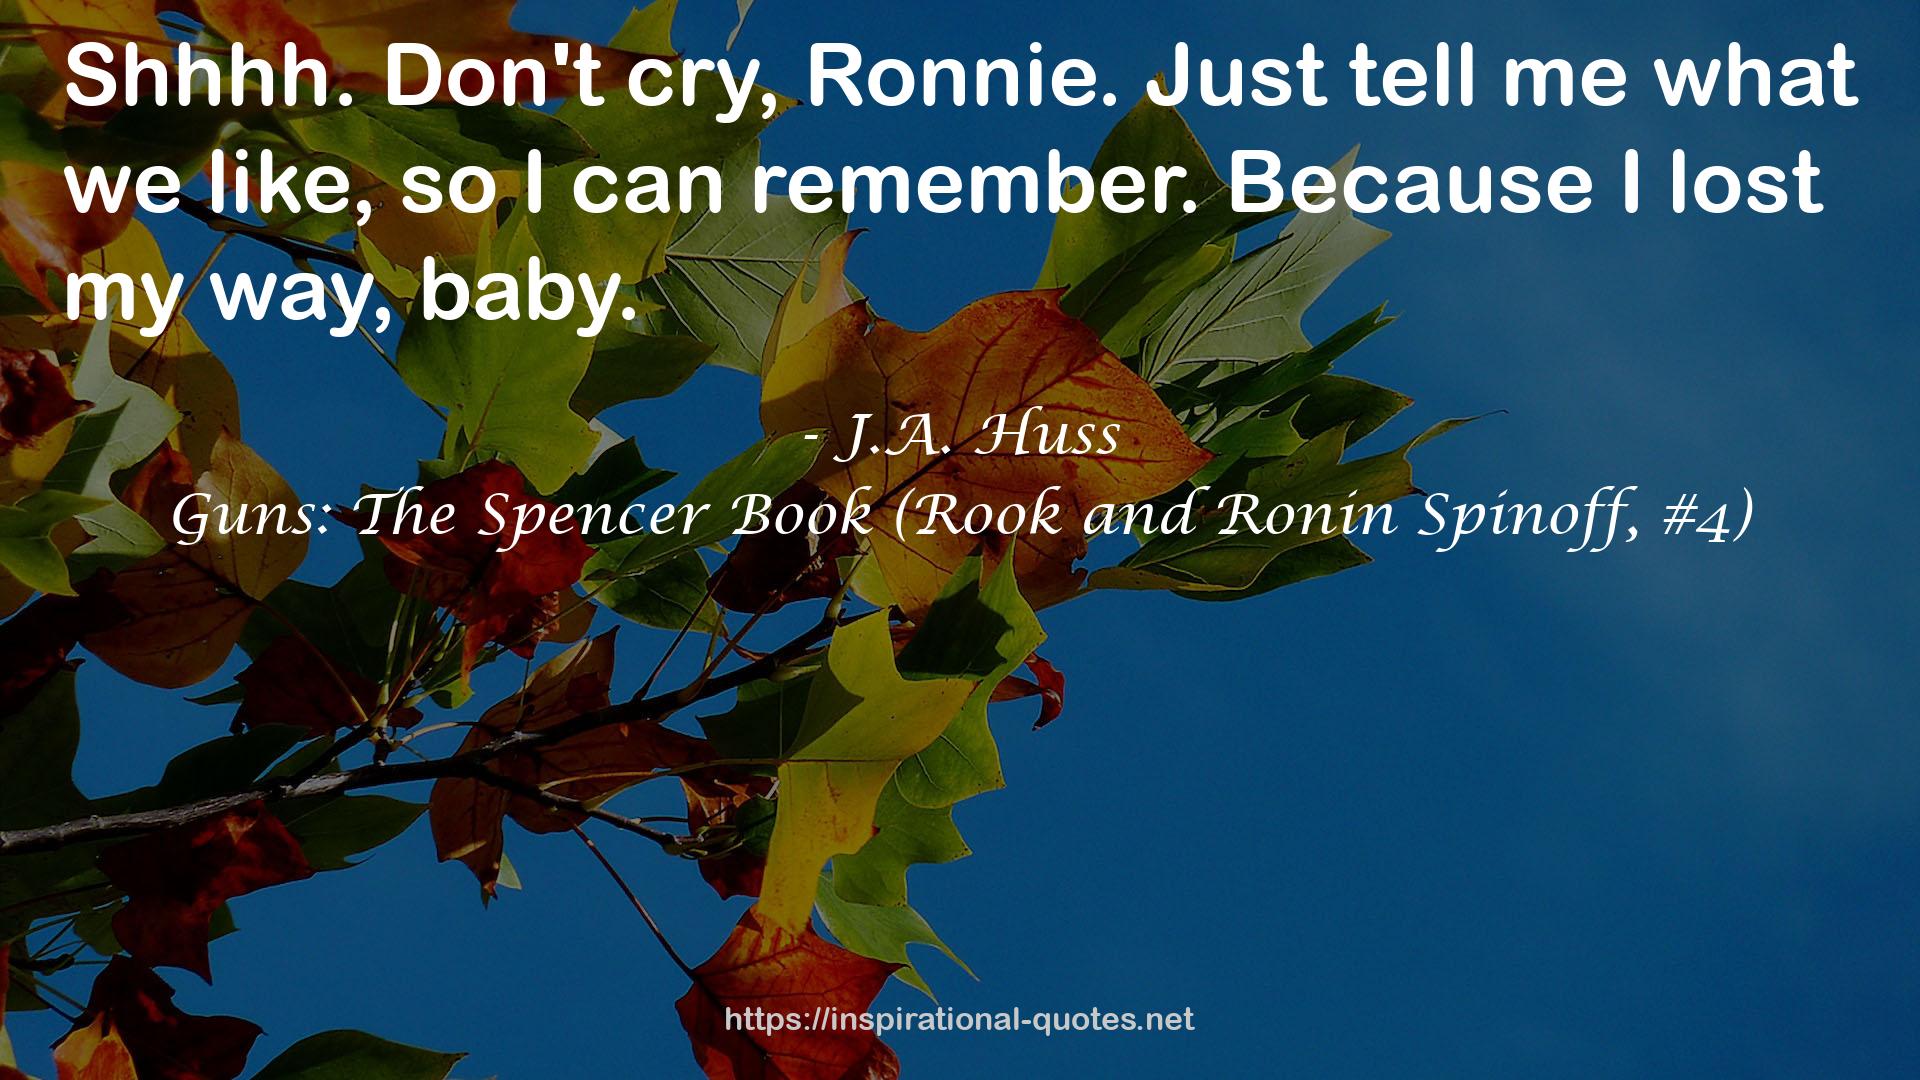 Guns: The Spencer Book (Rook and Ronin Spinoff, #4) QUOTES